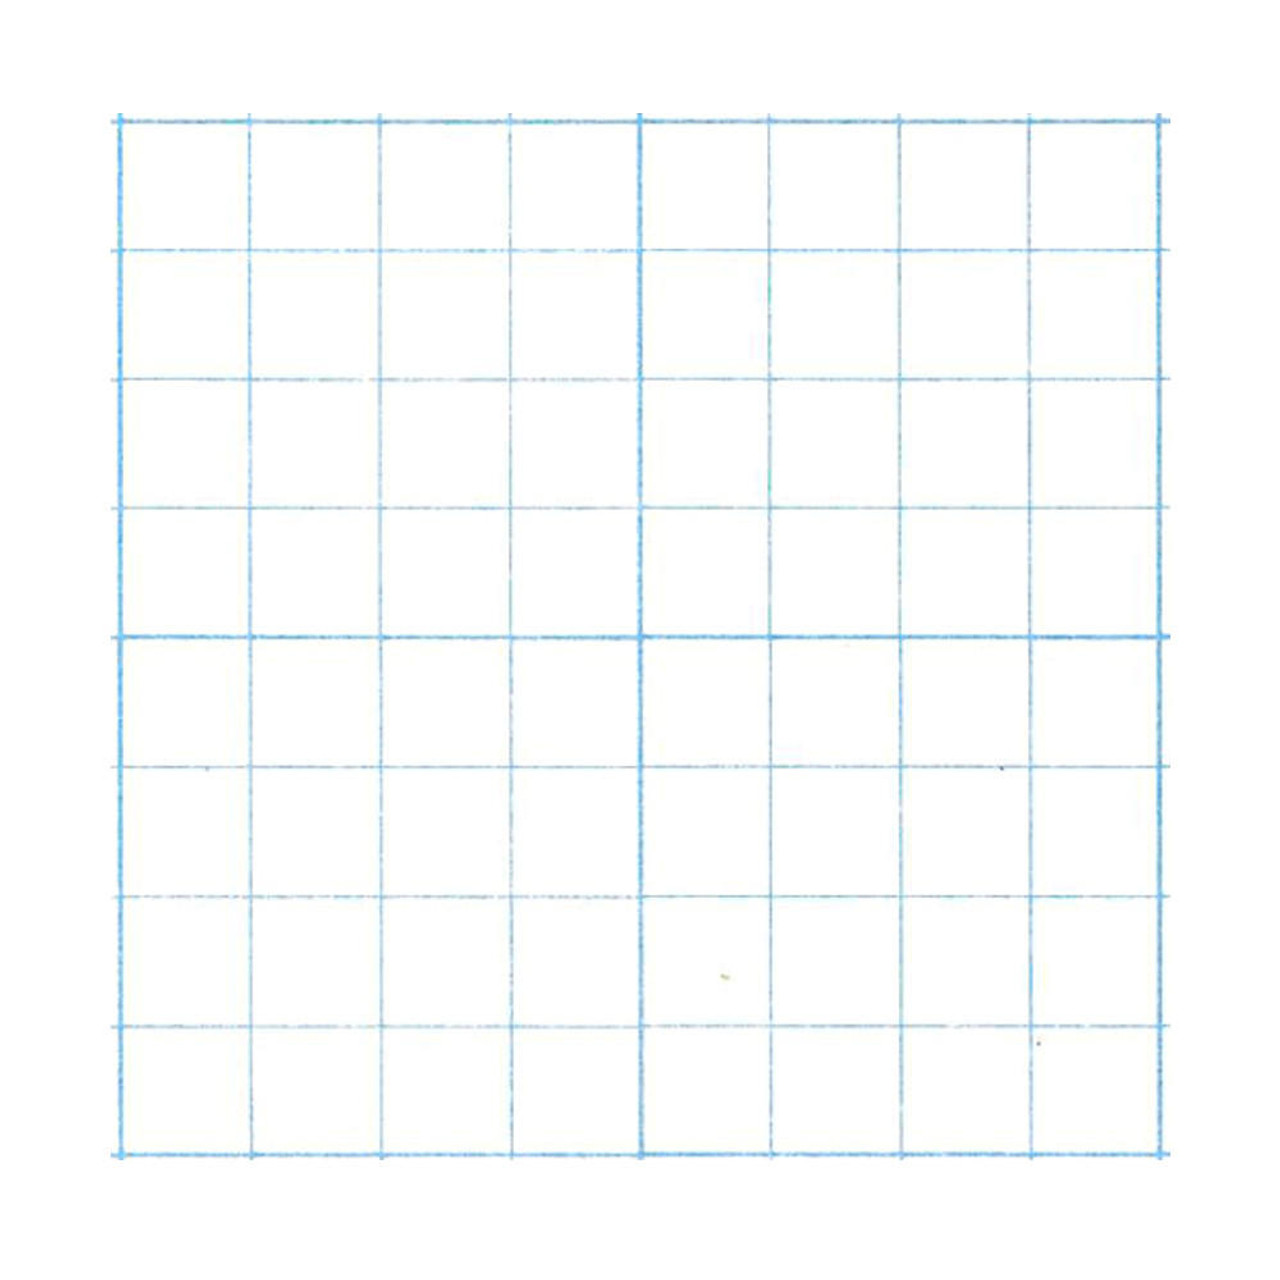 Graph Paper Notebook: 8 x 10 Large Graph Paper Notebook 4x4 Squares  (Paperback)